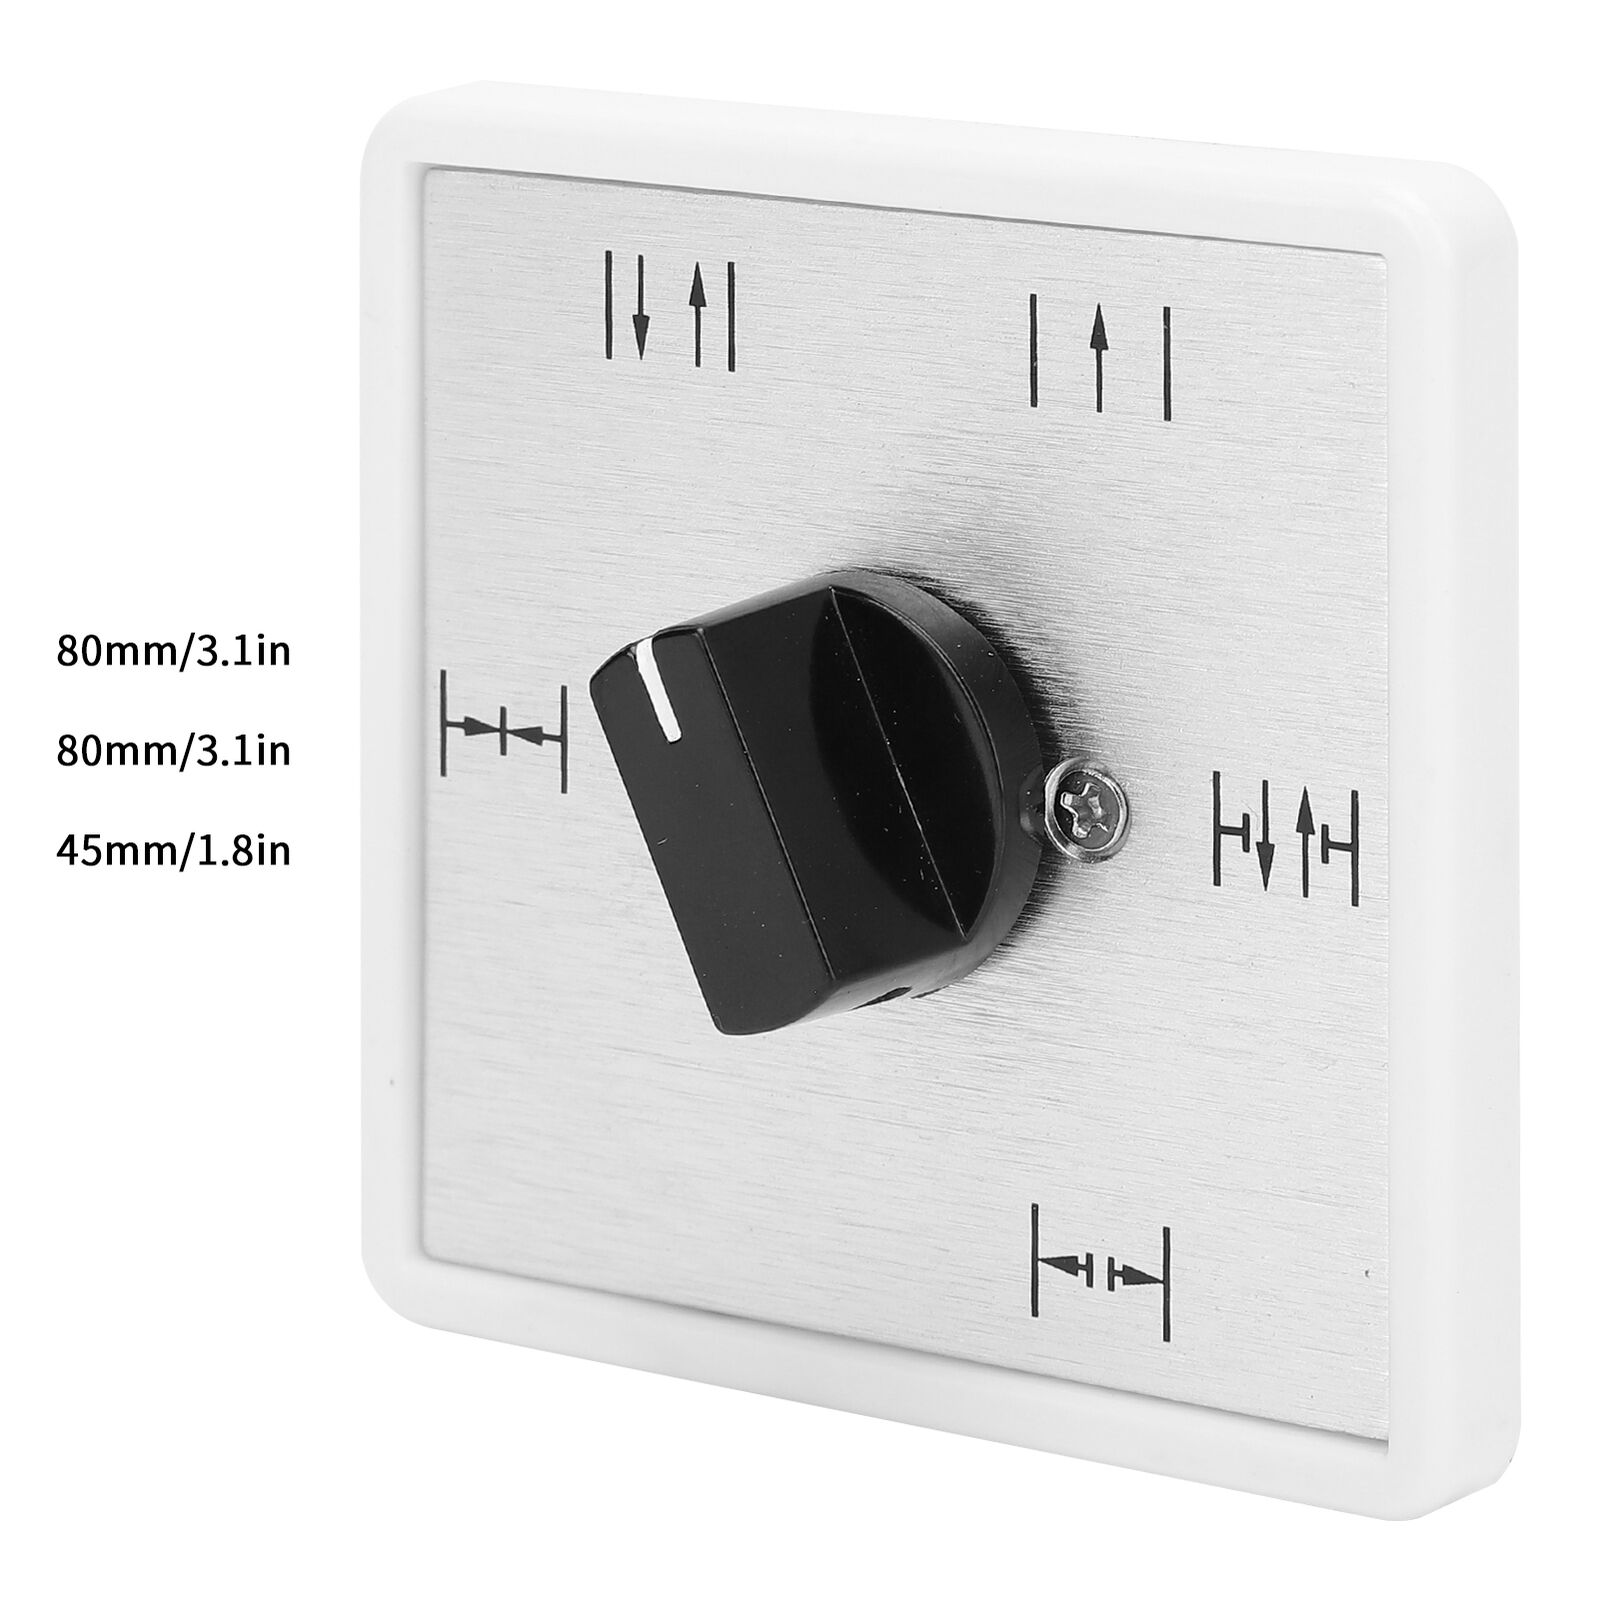 5 Fuctions Universal Automatic Door Knob Open Switch Wall Panel Sensor Switch